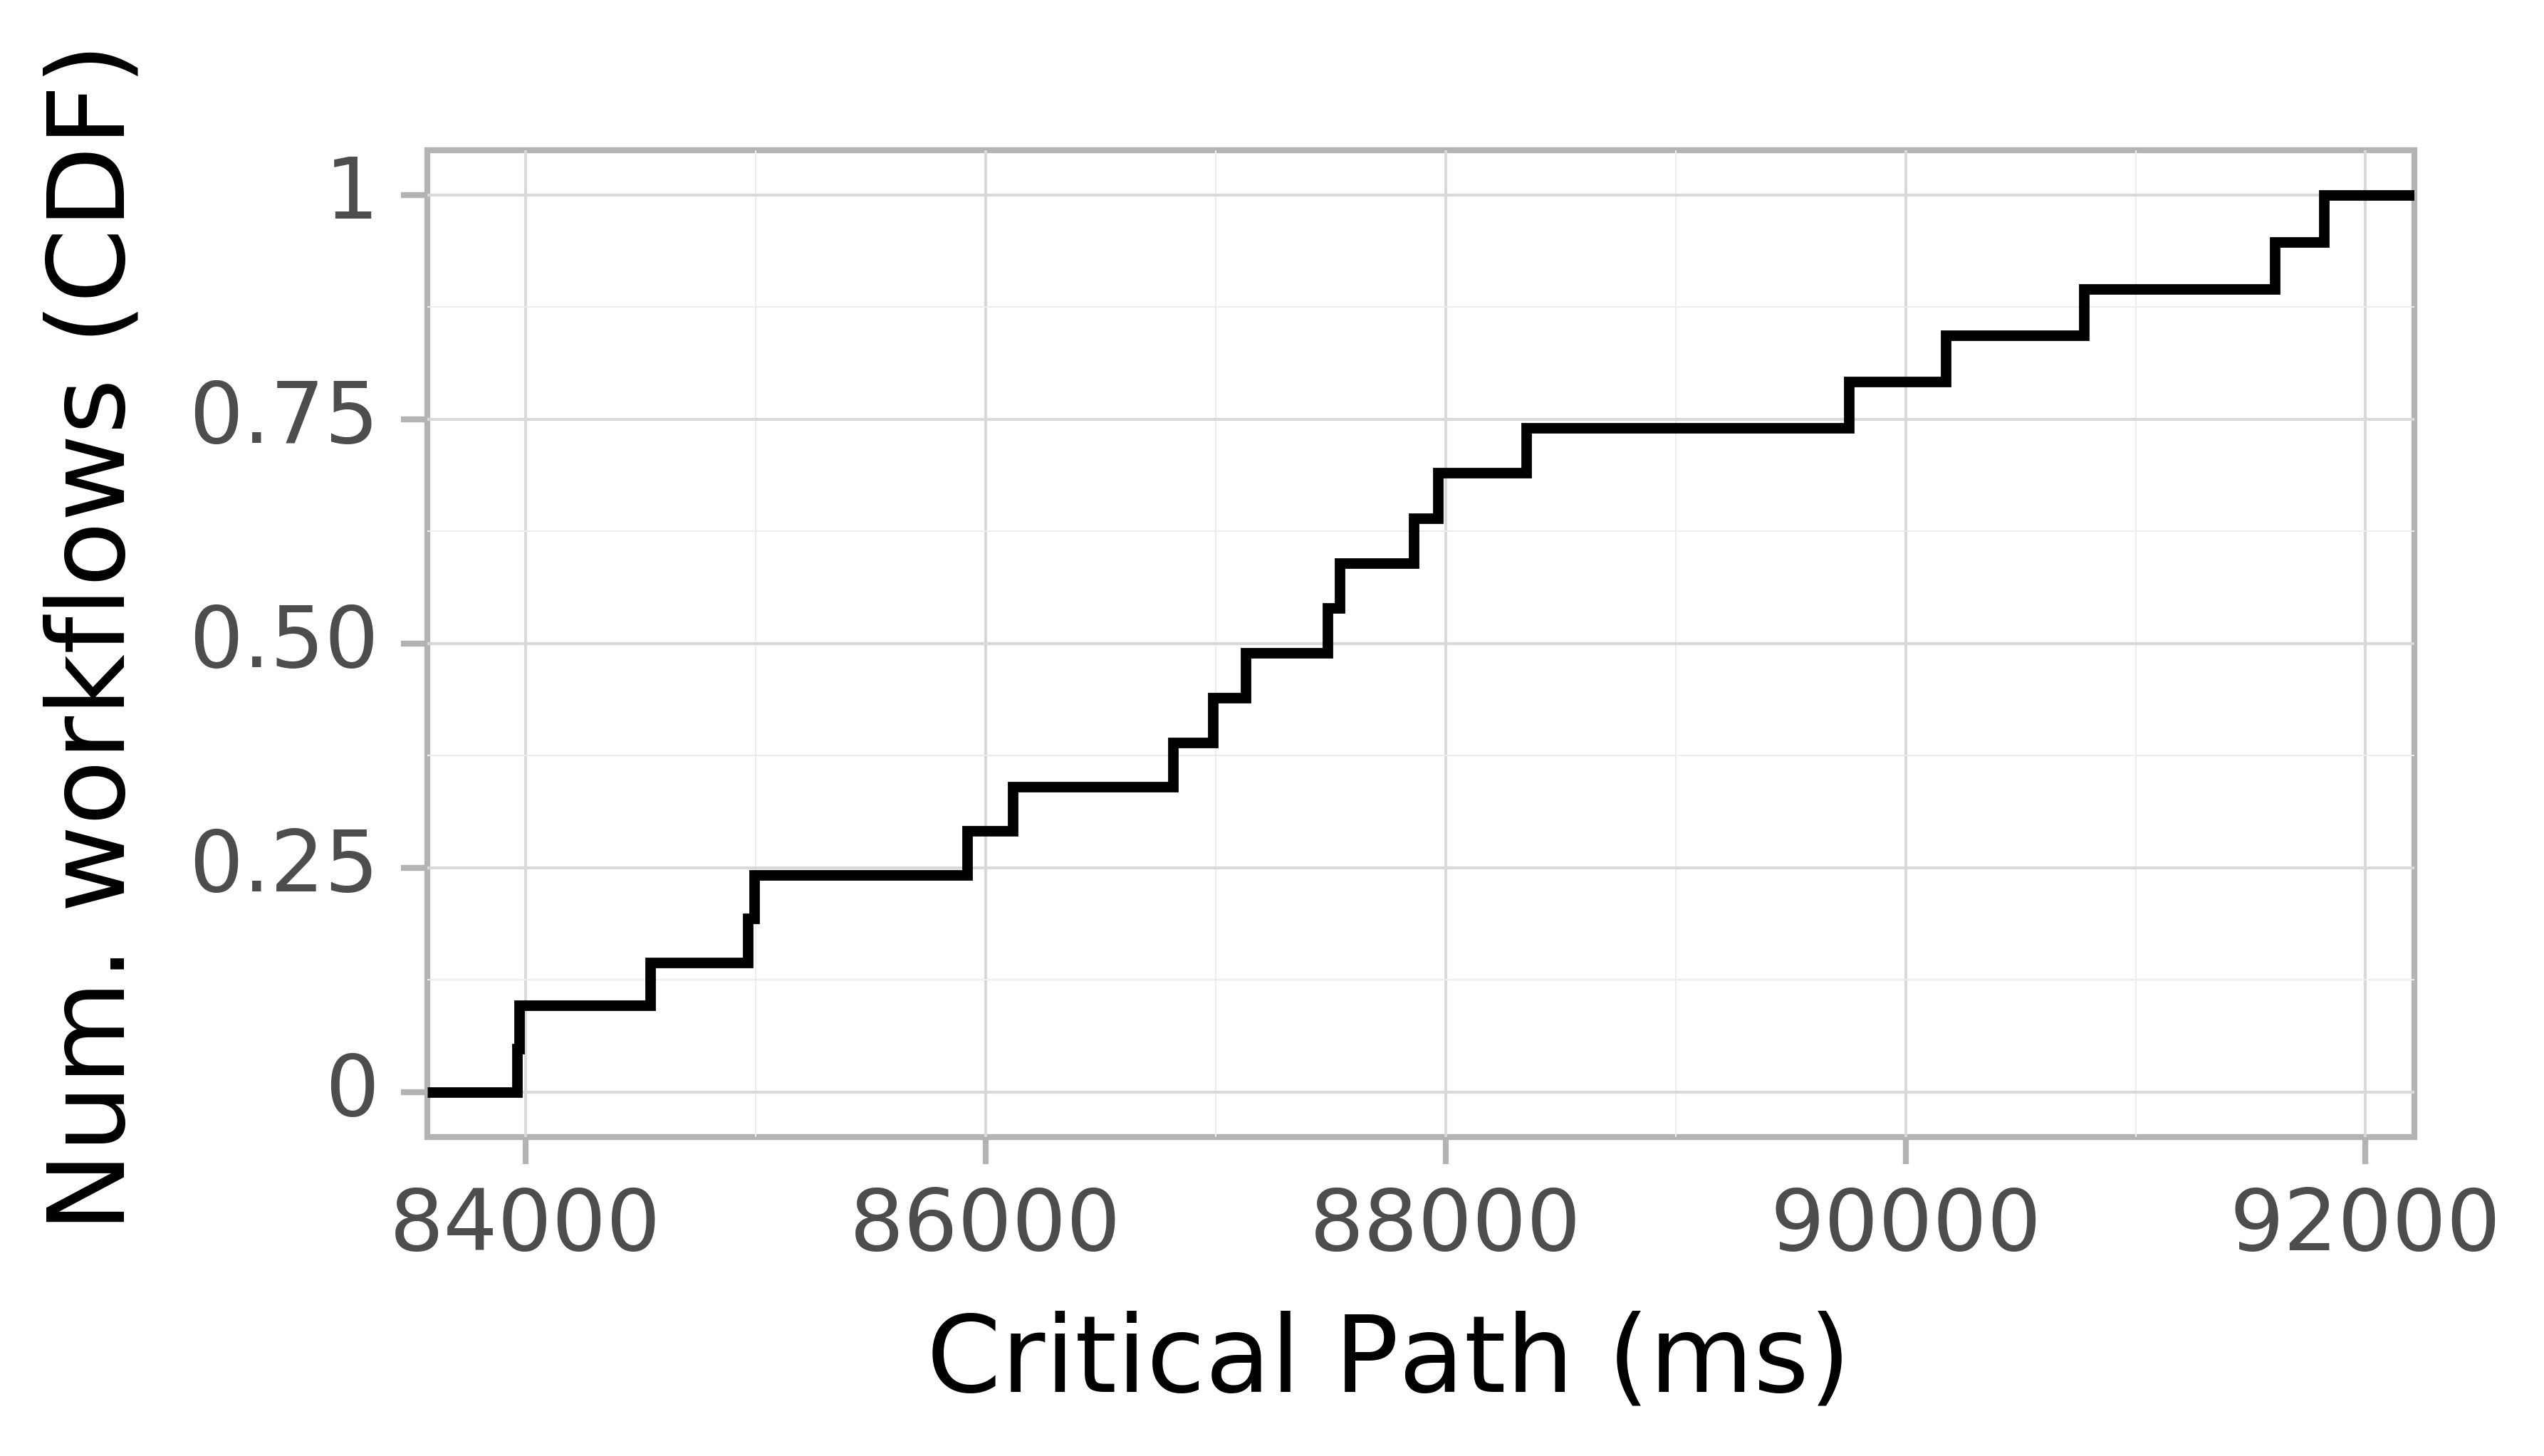 Job runtime CDF graph for the askalon-new_ee46 trace.